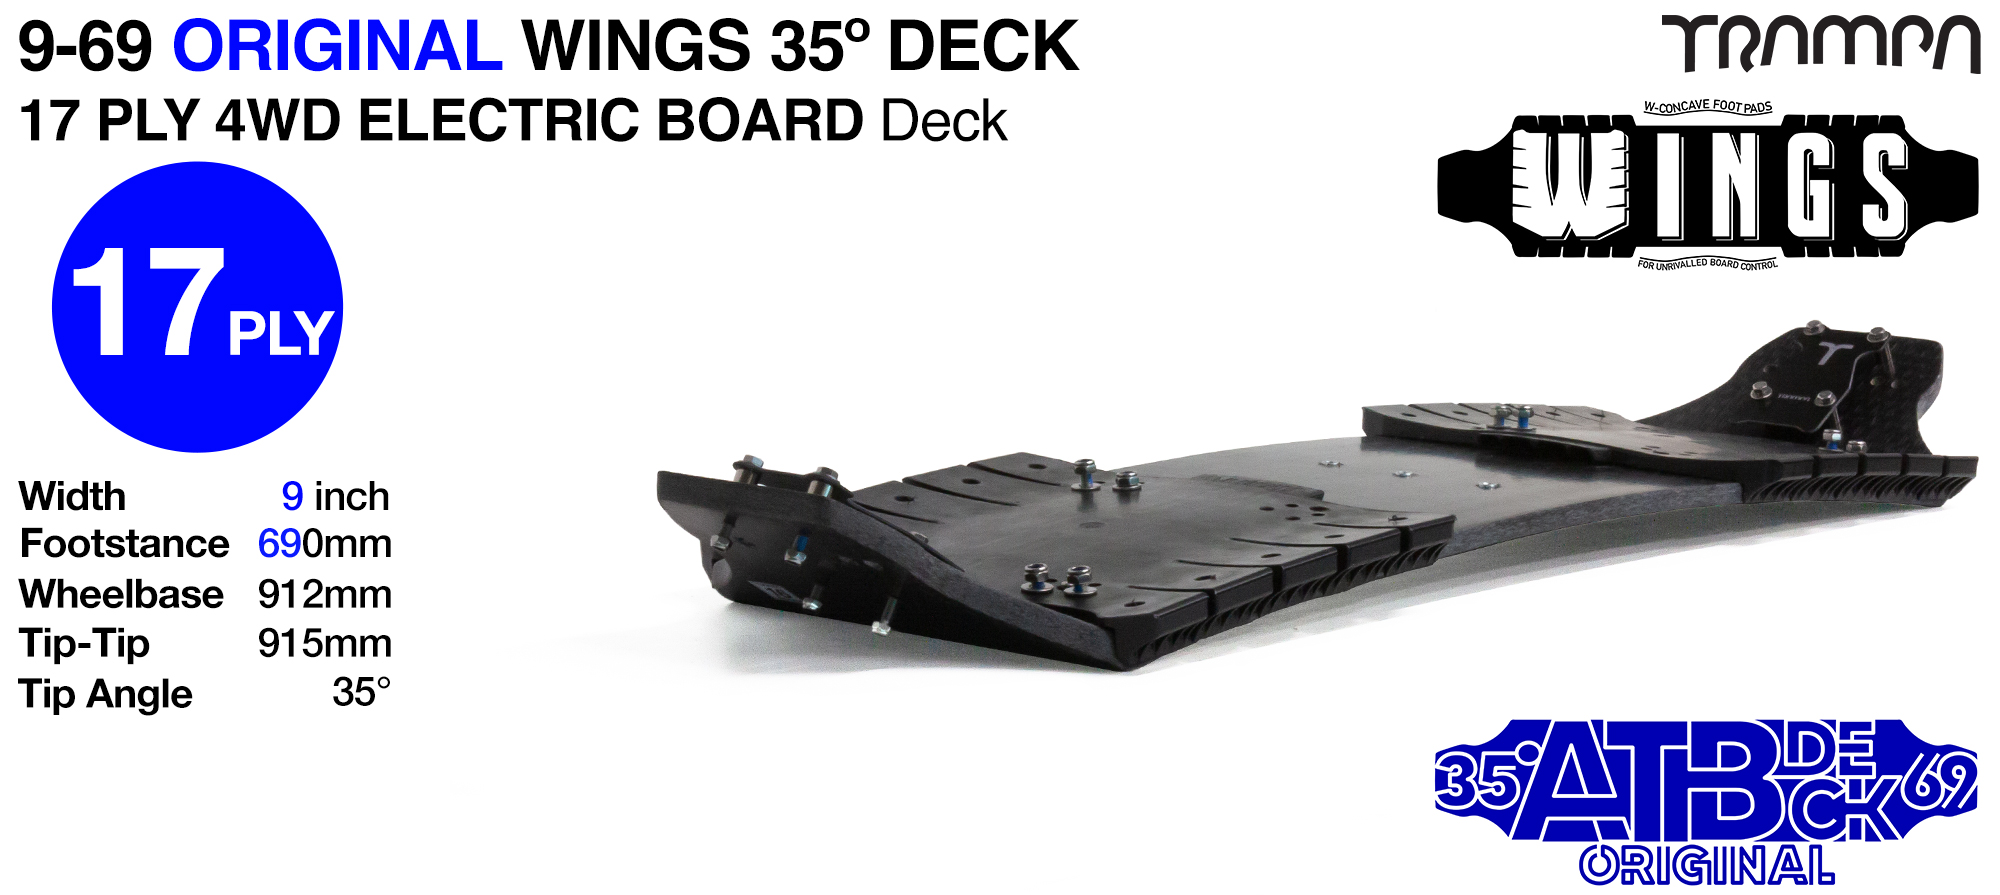 TRAMPA 35° 9/69 4WD Mountainboard Deck with WINGS - WINGS give safe cable routing, add W Shaped concave & the increase the width of the deck from 9 to 10 Inches - 17ply 